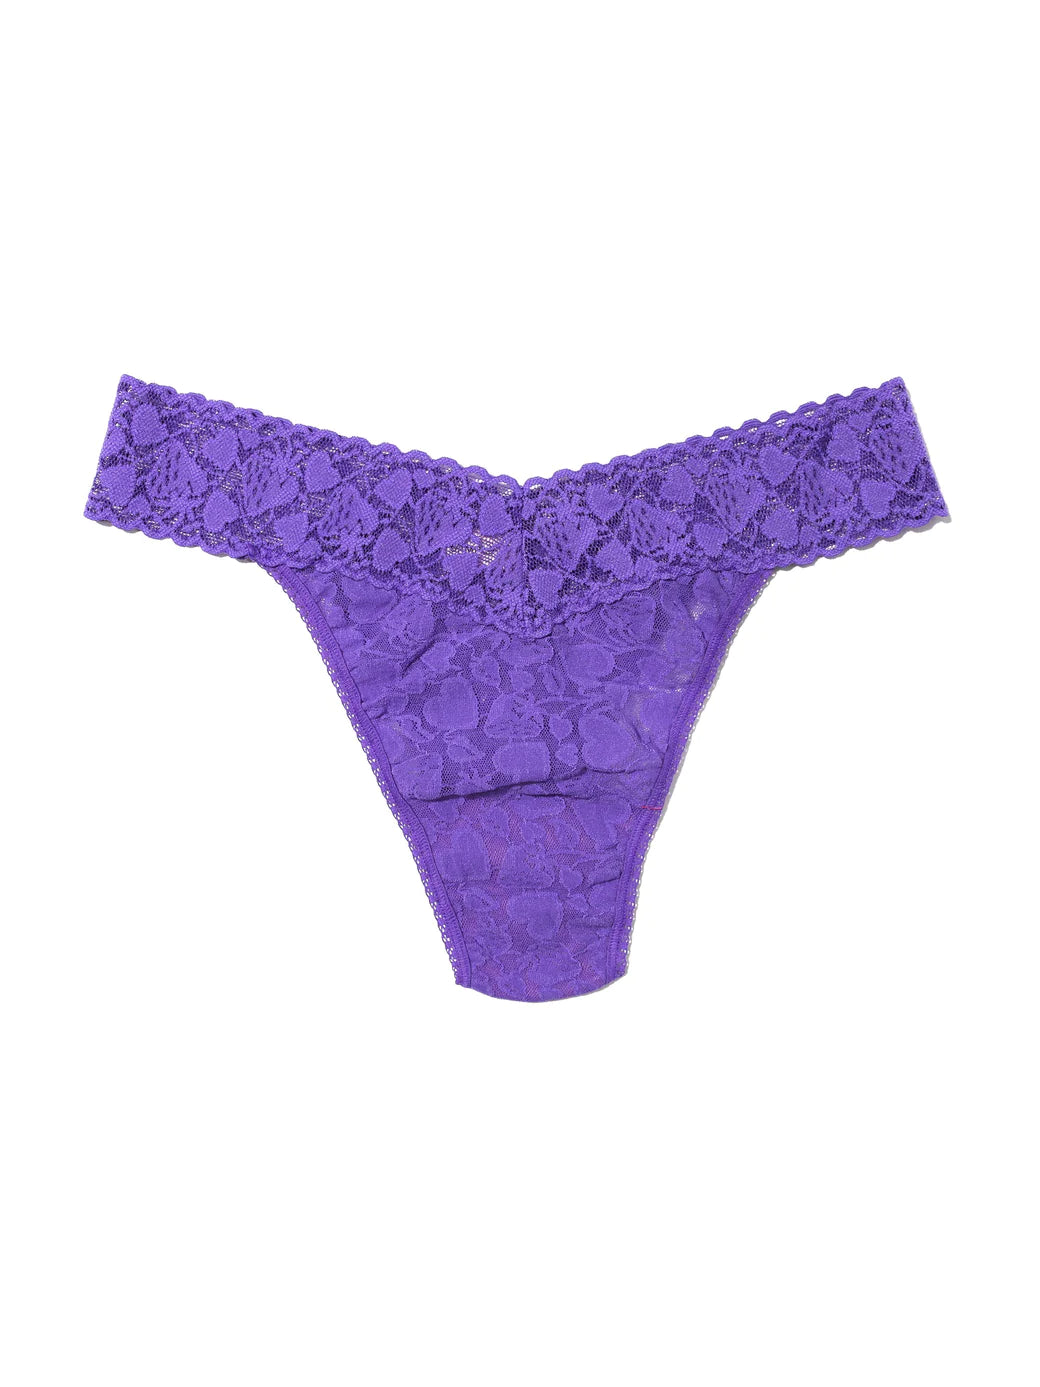 Original Rise Signature Lace Thong In Raw Amethyst - Hanky Panky